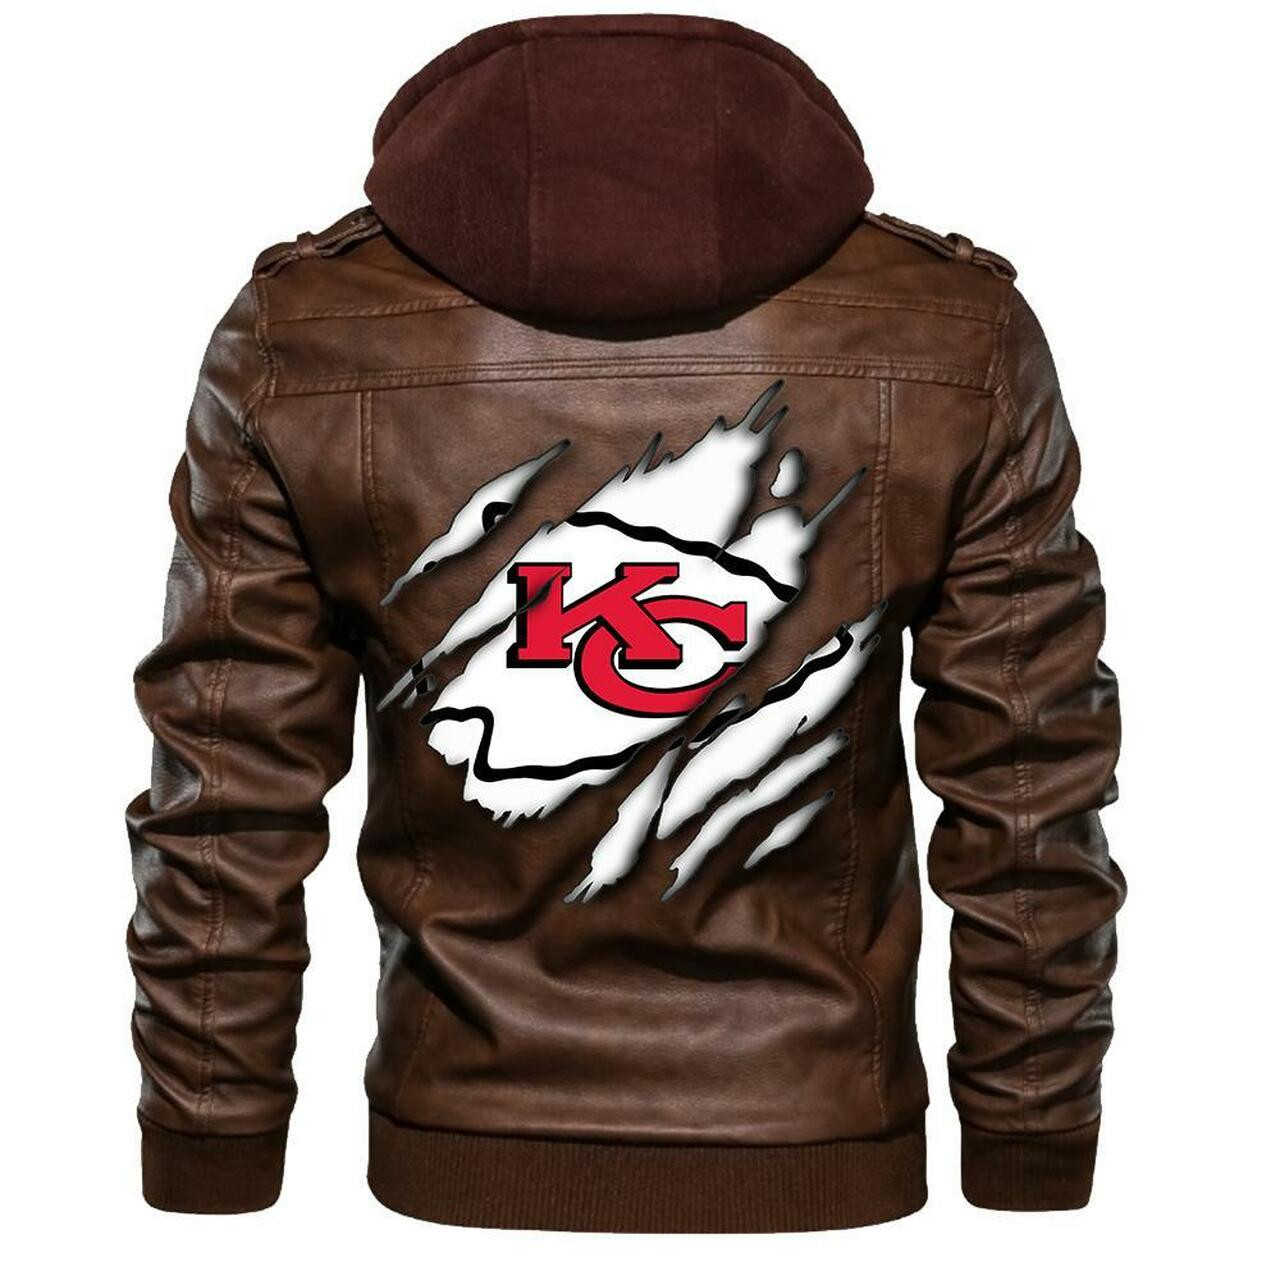 Our store has all of the latest leather jacket 143